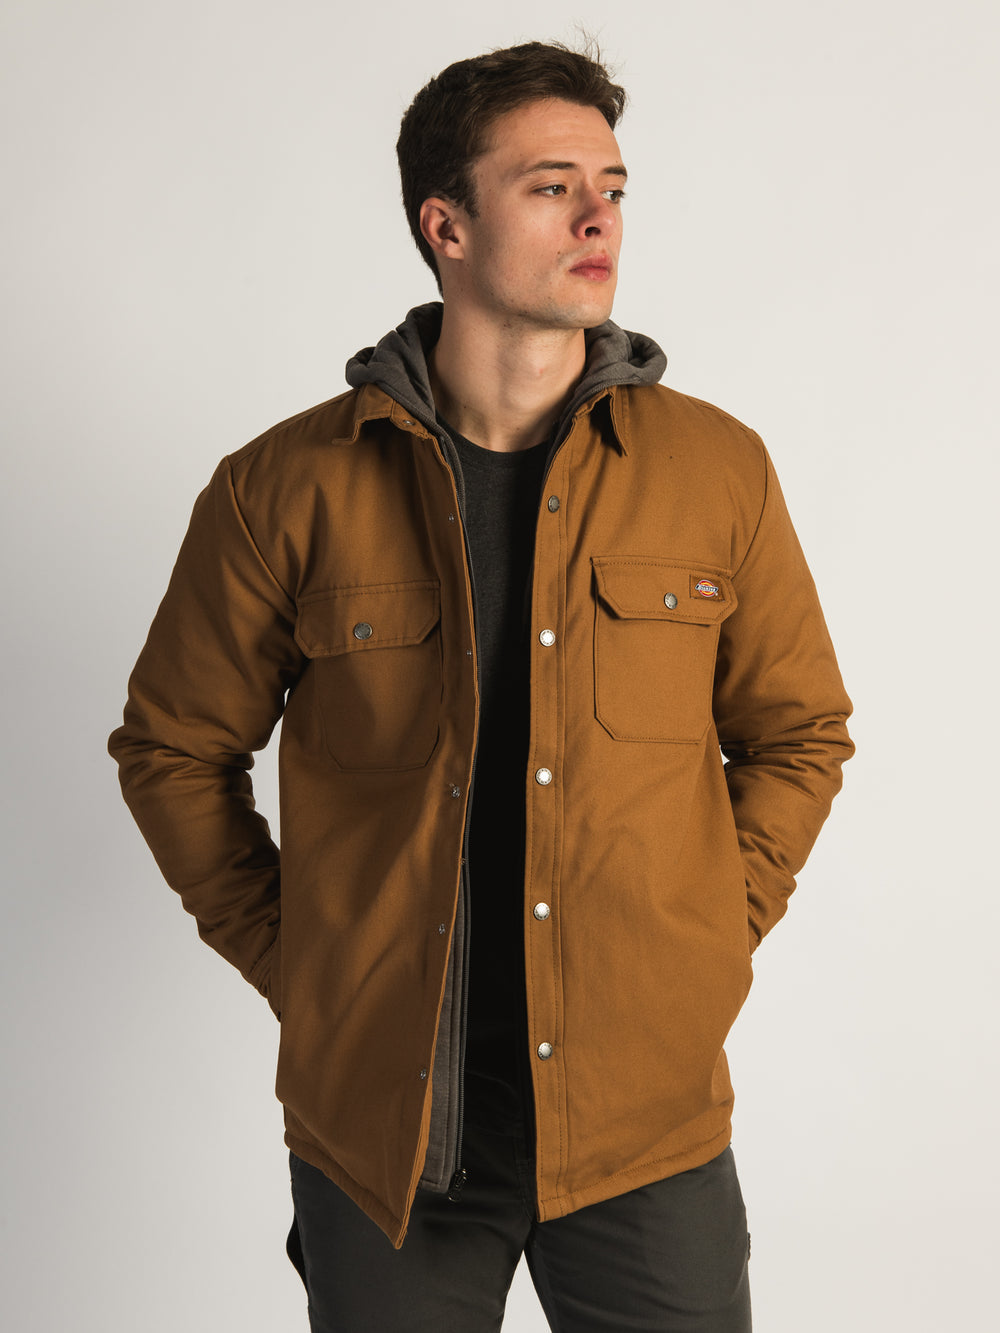 Insulated Parka Jacket - Dickies US